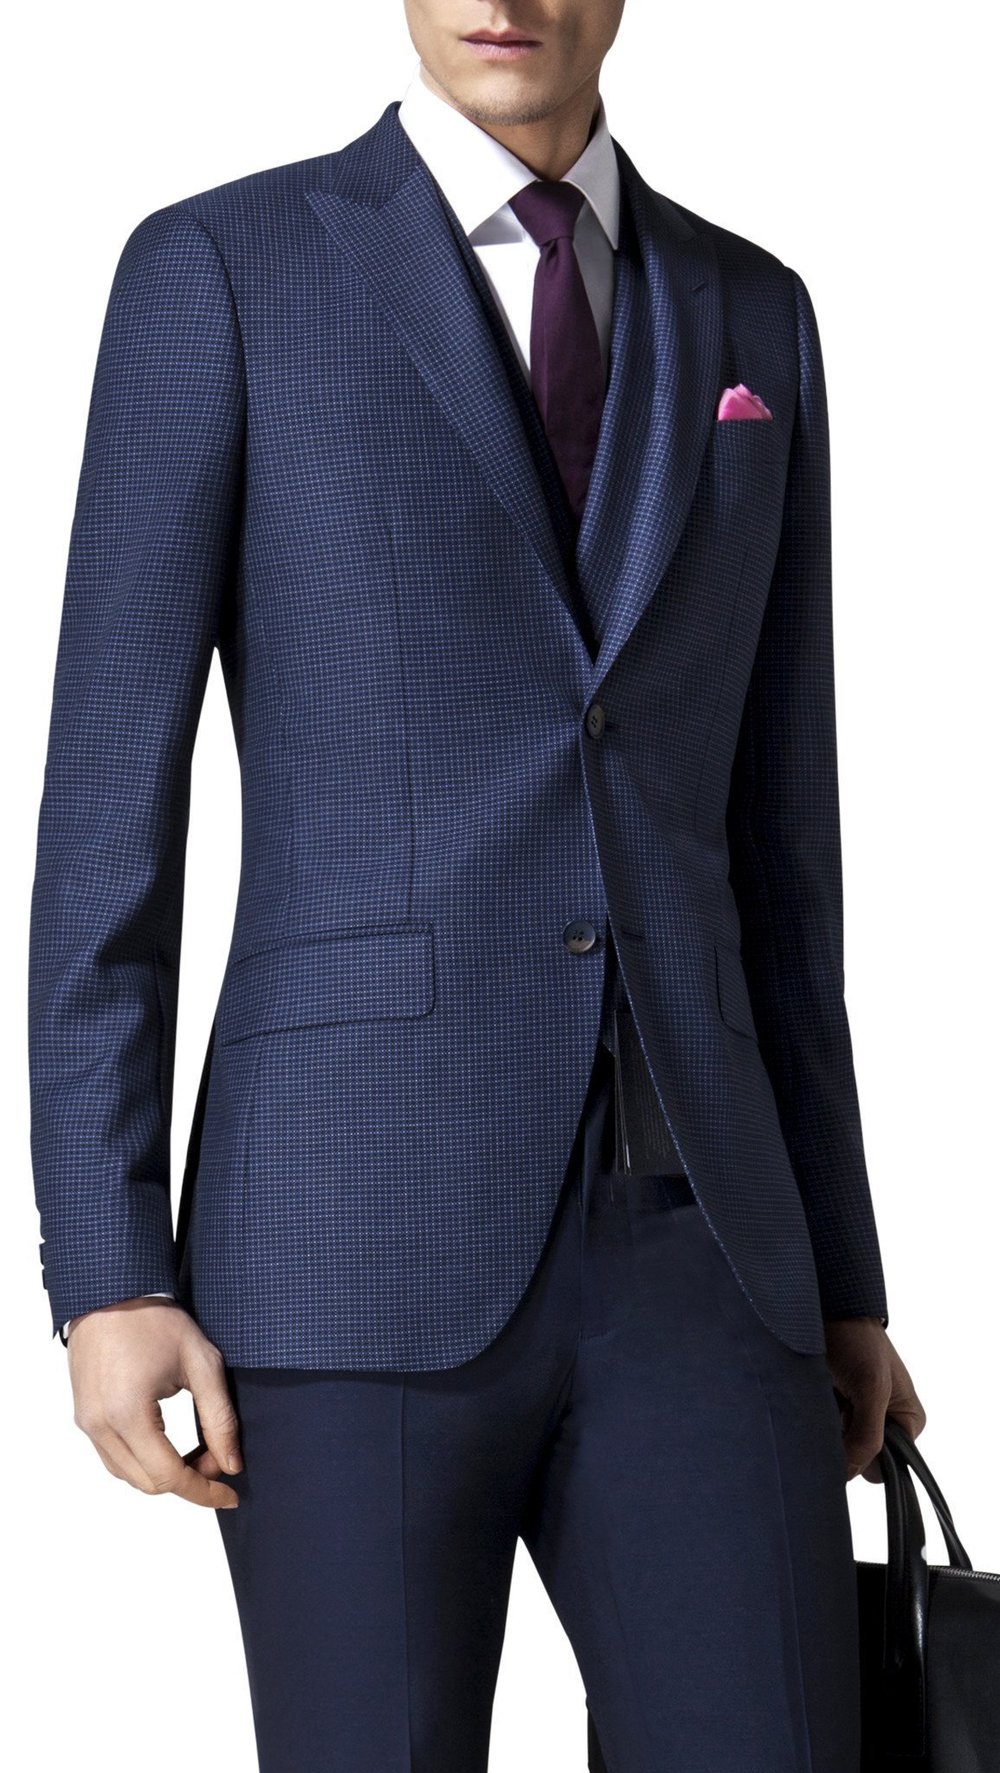 Business Suit Style